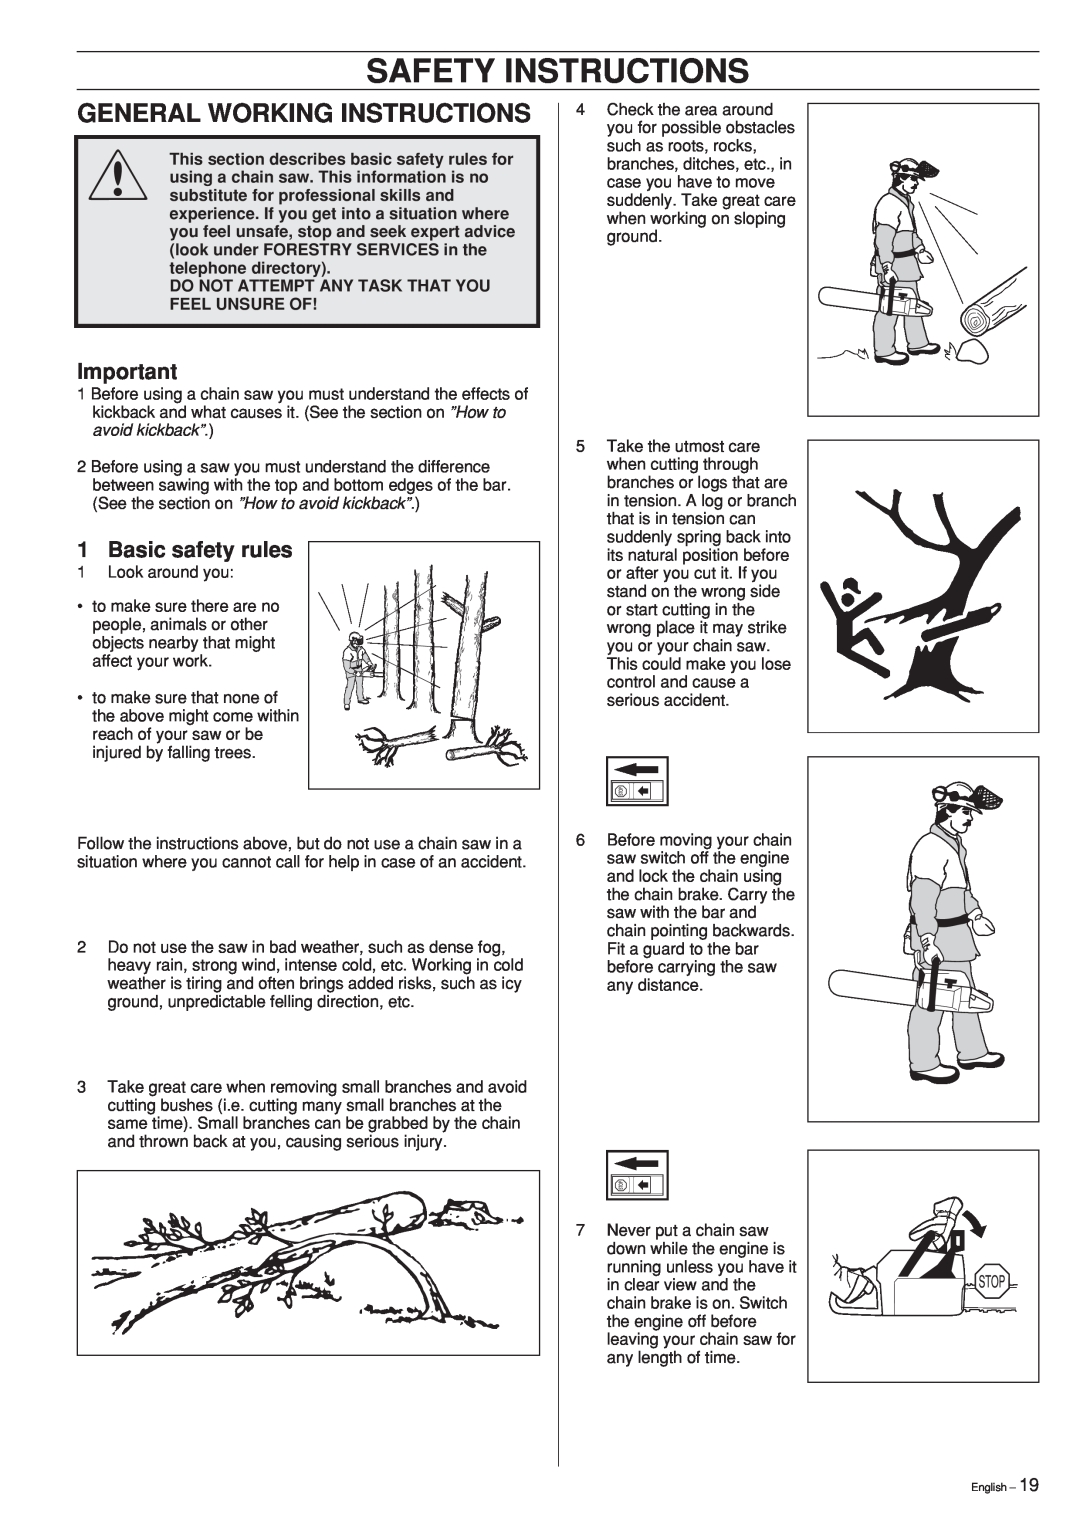 Husqvarna 339XP manual General Working Instructions, Basic safety rules, Safety Instructions 